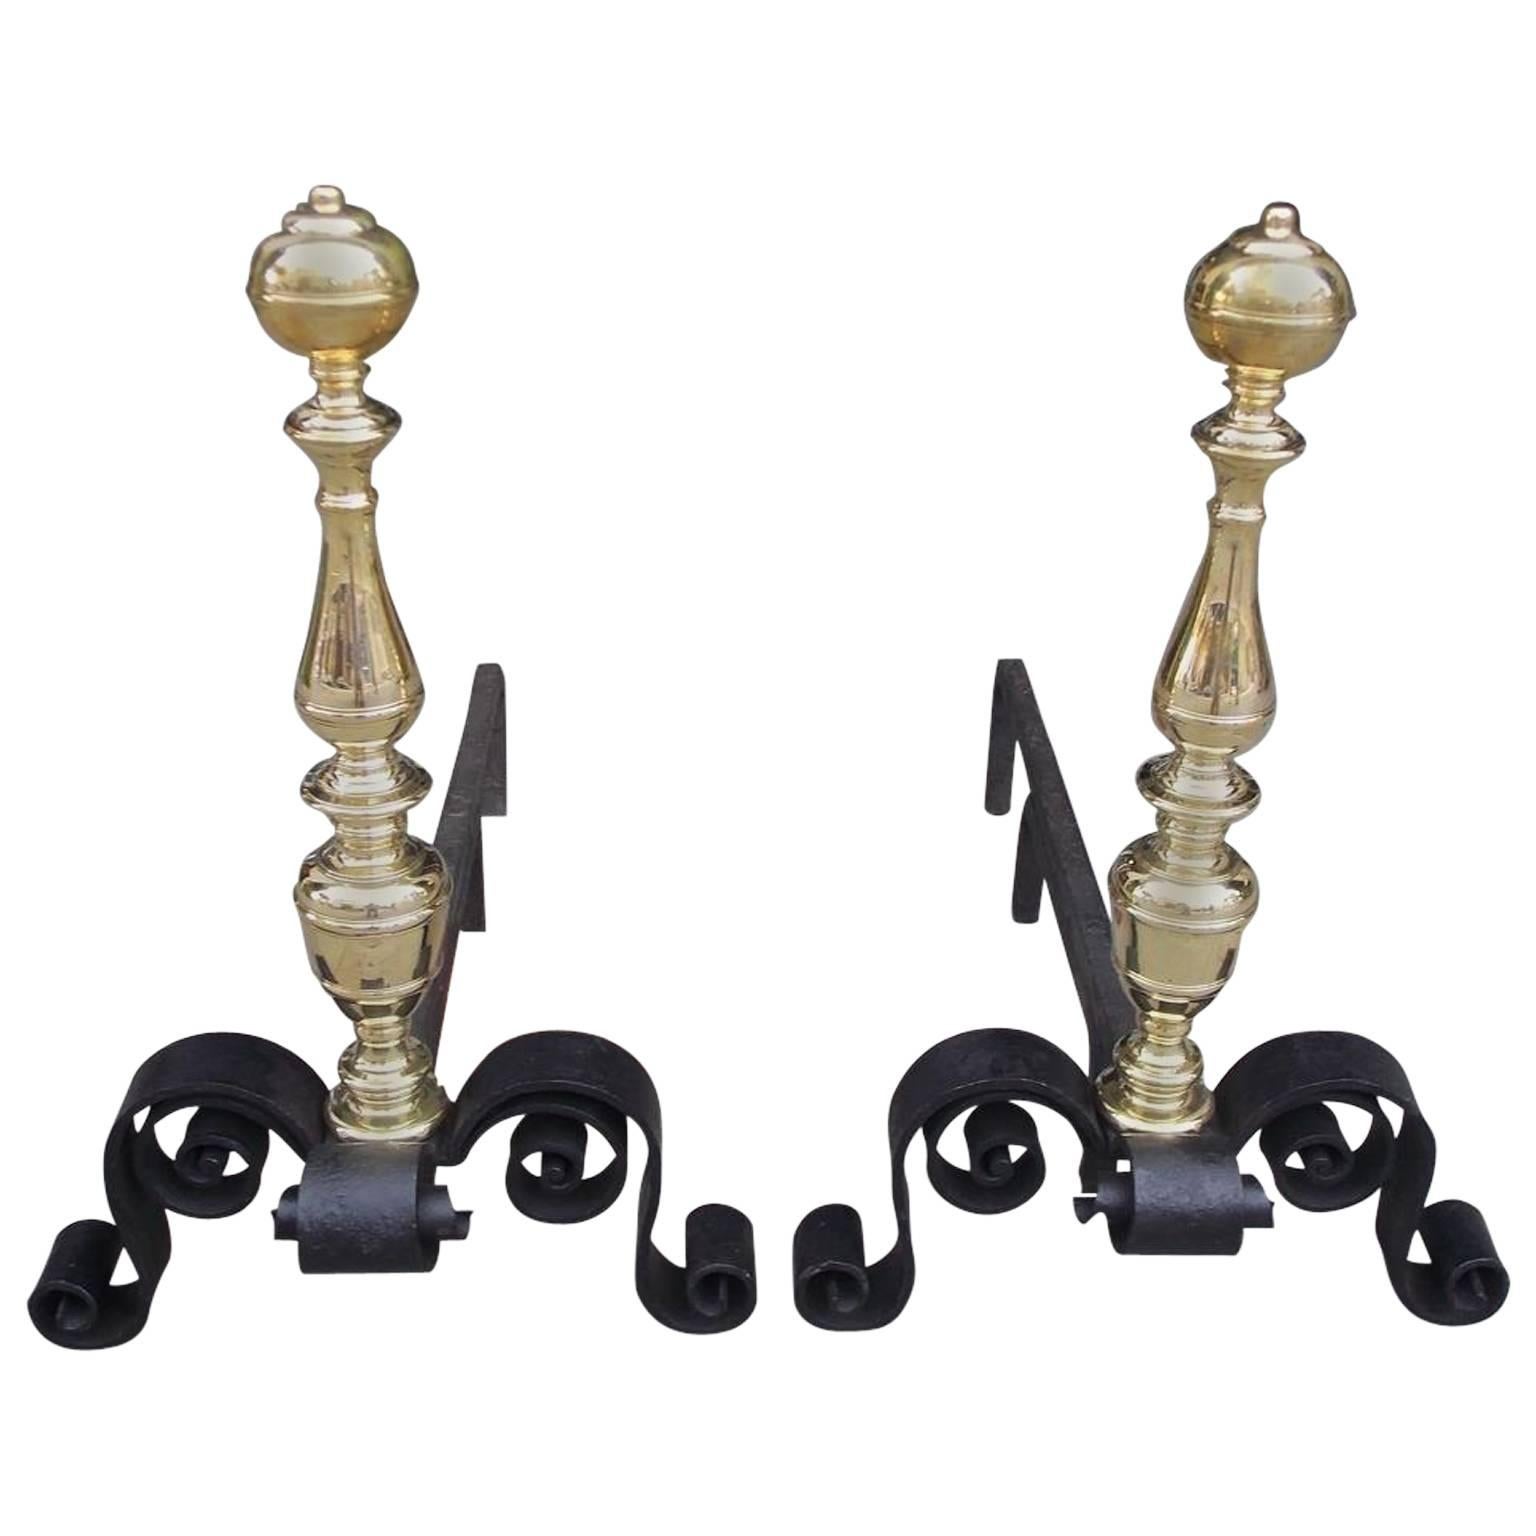 Pair of American Brass and Wrought Iron Ball Ringed Finial Andirions, C. 1840